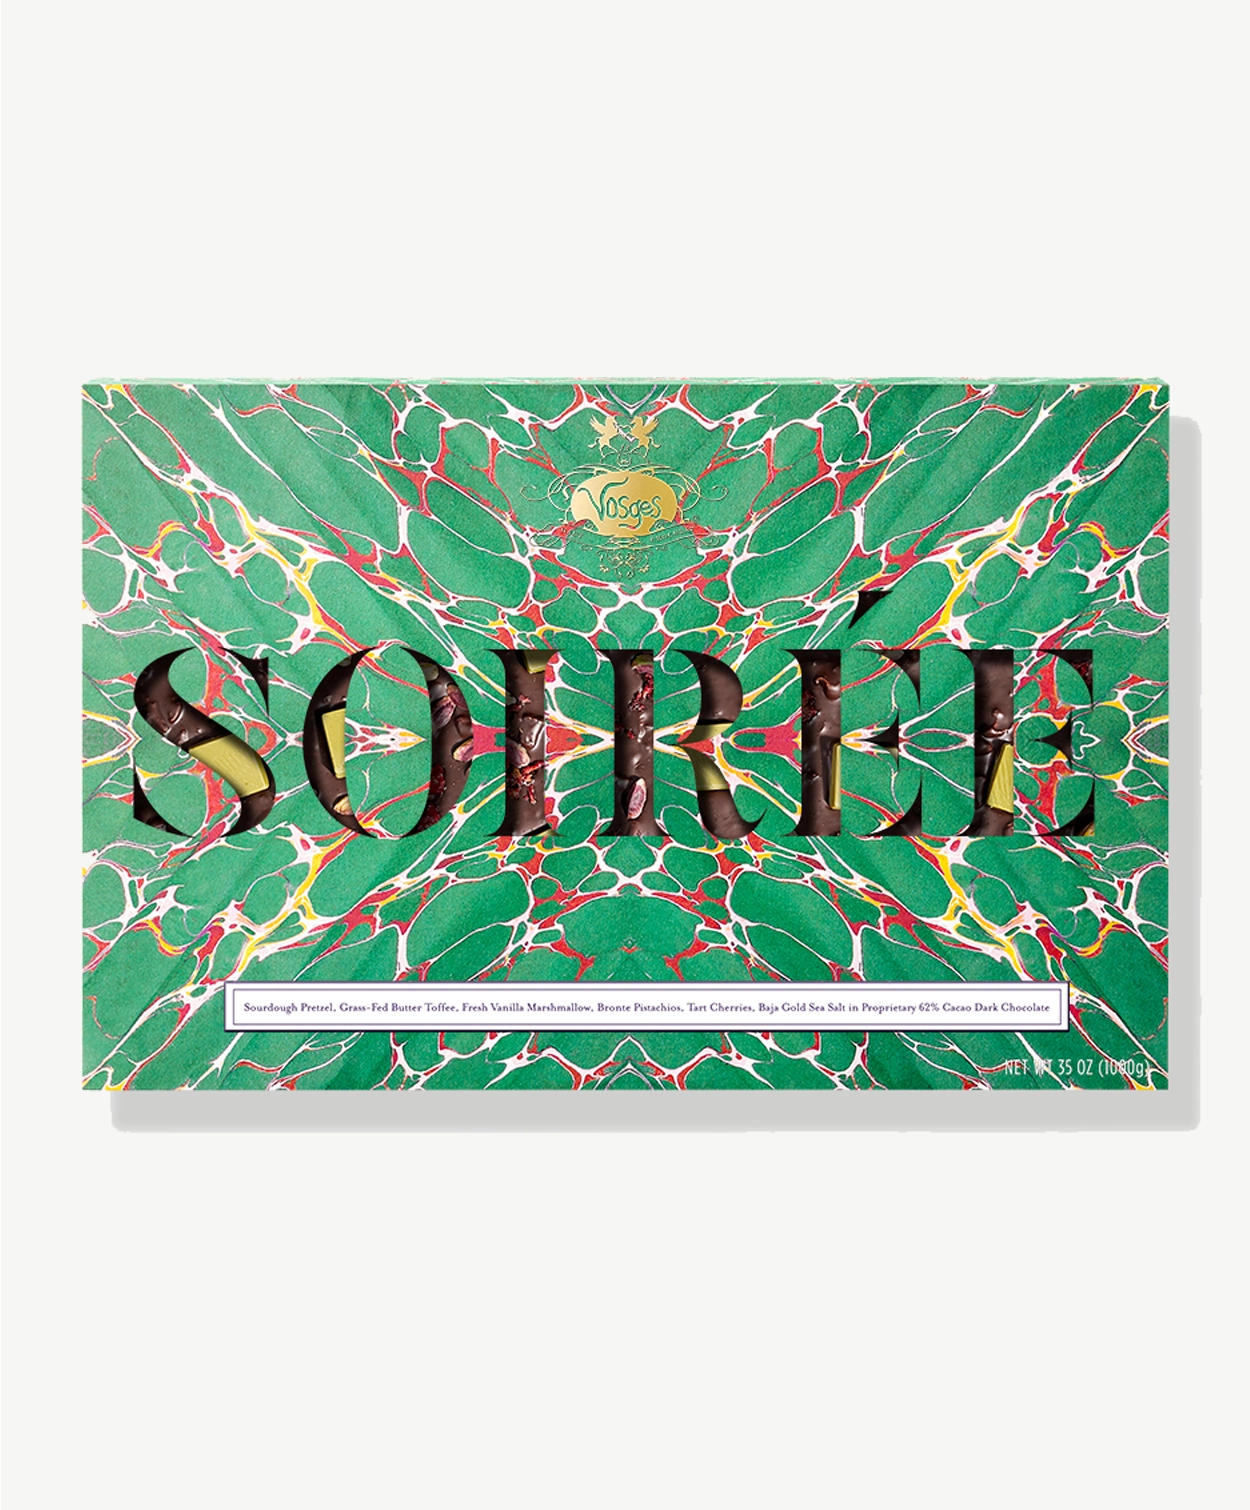 Large two pound slab of Vosges Choclate wrapped in a bright blue psychedelic wrapper reading, "Soirée"" 